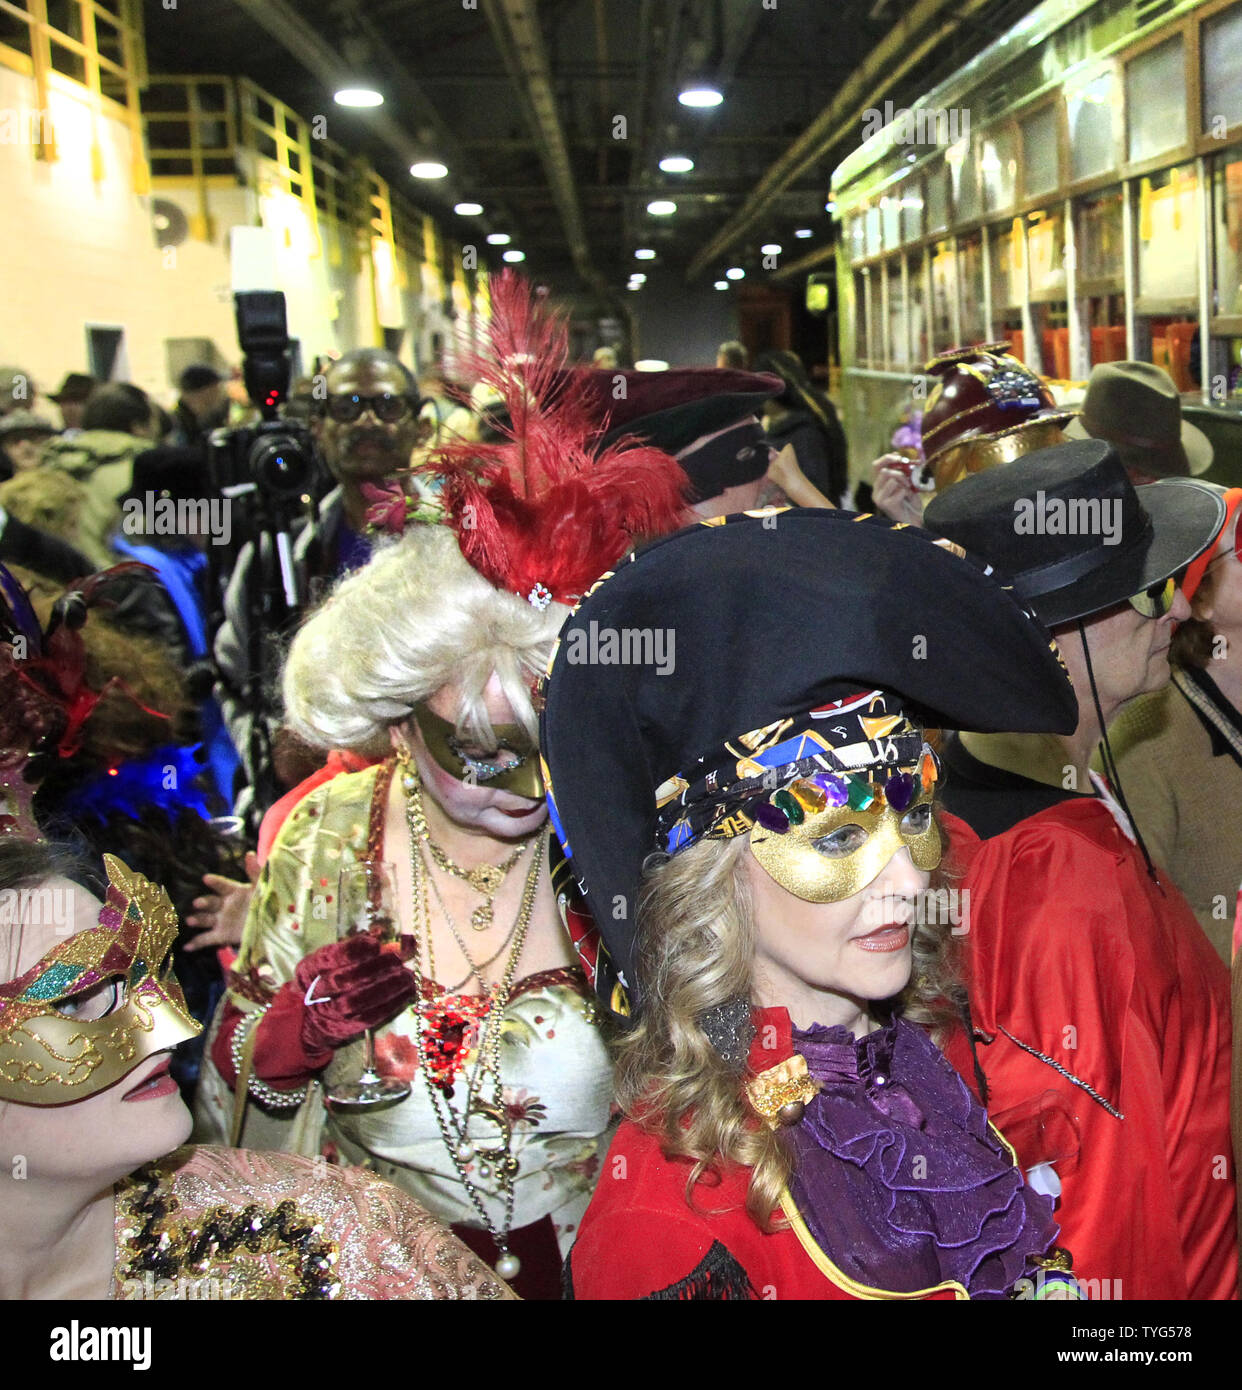 Member of Phunny Phorty Phellows, 'The Heralds of Carnival,' celebrates the start of the 2016 Carnival season in New Orleans with a streetcar ride down St. Charles Avenue on Twelfth Night, January 6, 2016.The Mardi Gras organization is known for its satirical parade, and members' costumes often reflect topical themes.  Photo by AJ Sisco/UPI Stock Photo